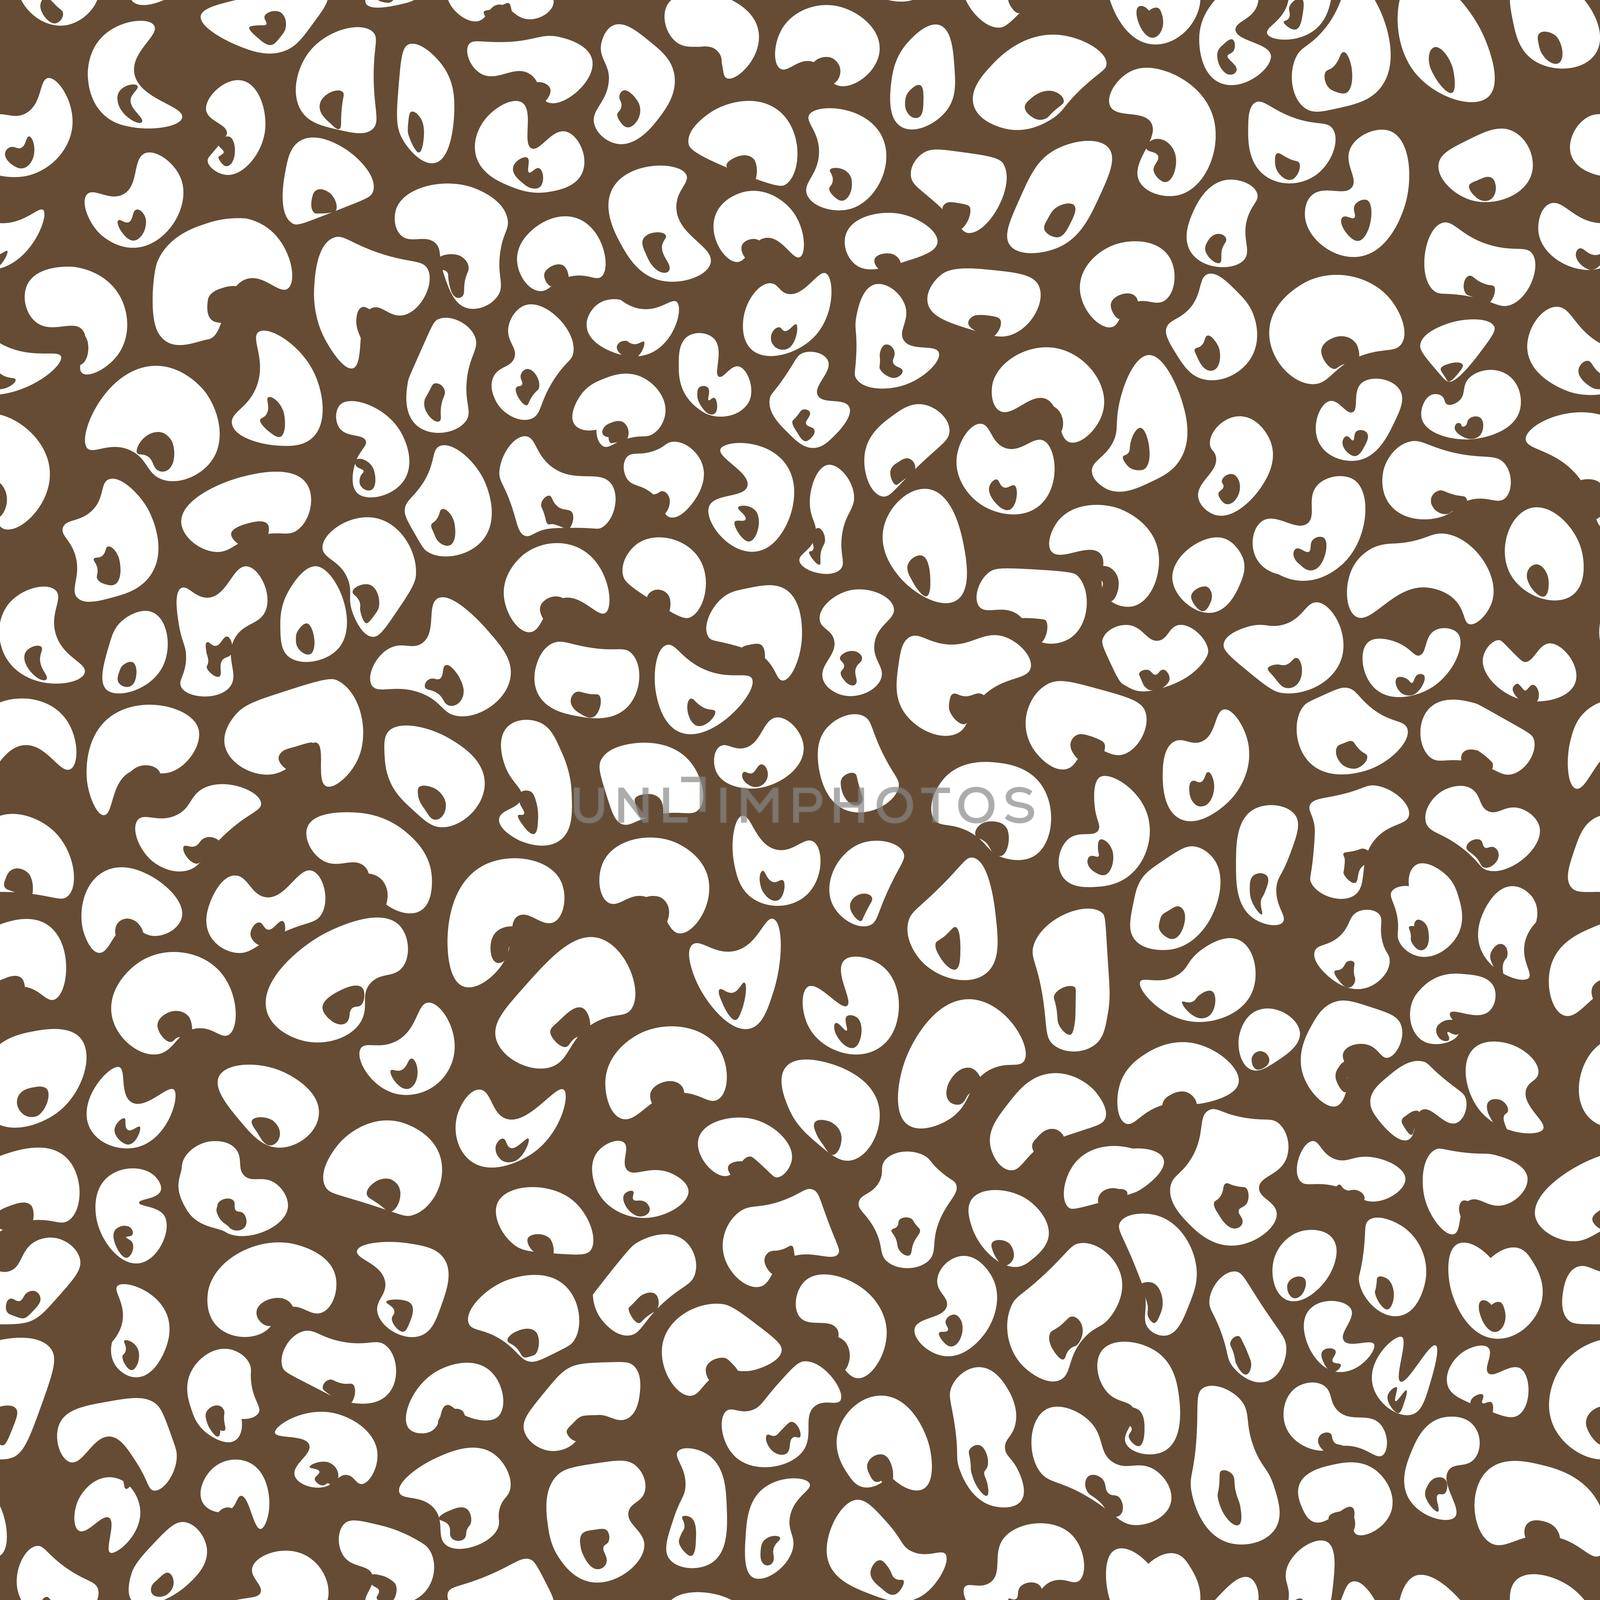 Abstract modern leopard seamless pattern. Animals trendy background. Beige and white decorative vector stock illustration for print, card, postcard, fabric, textile. Modern ornament of stylized skin.